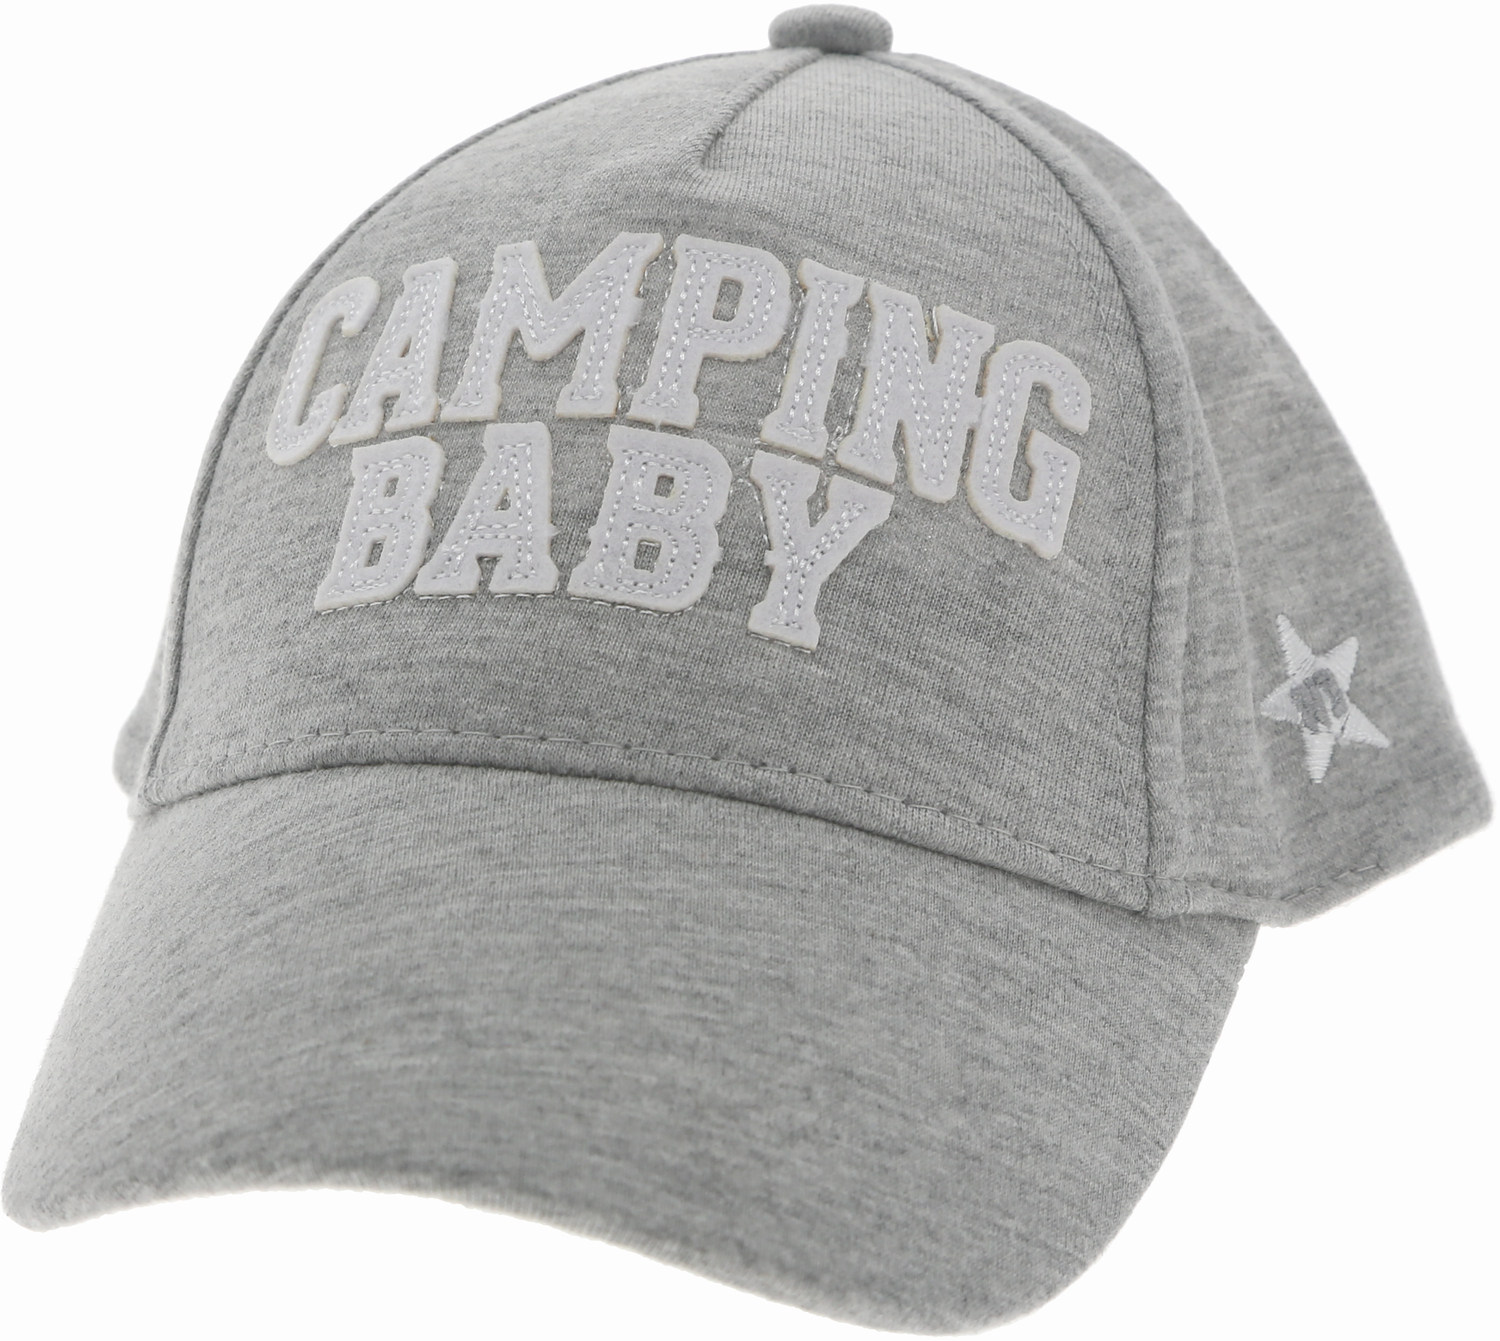 Camping by We Baby - Camping - Adjustable Toddler Hat
(0-12 Months)